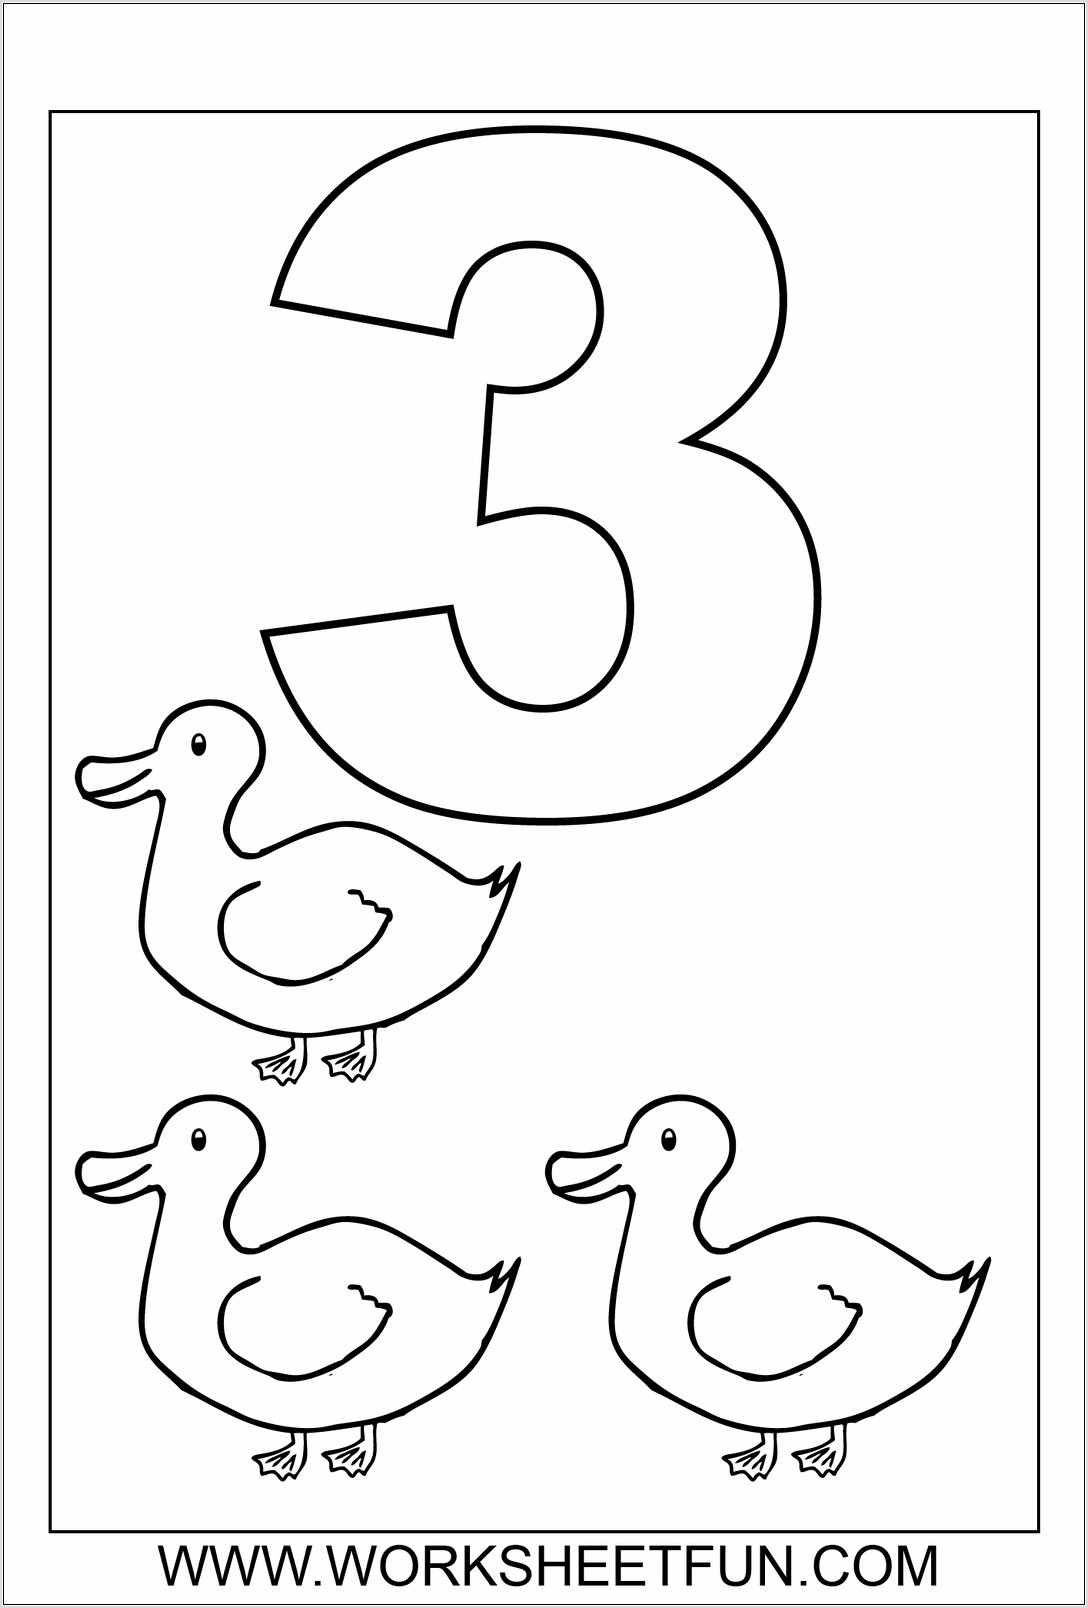 Worksheets With Numbers For Kindergarten